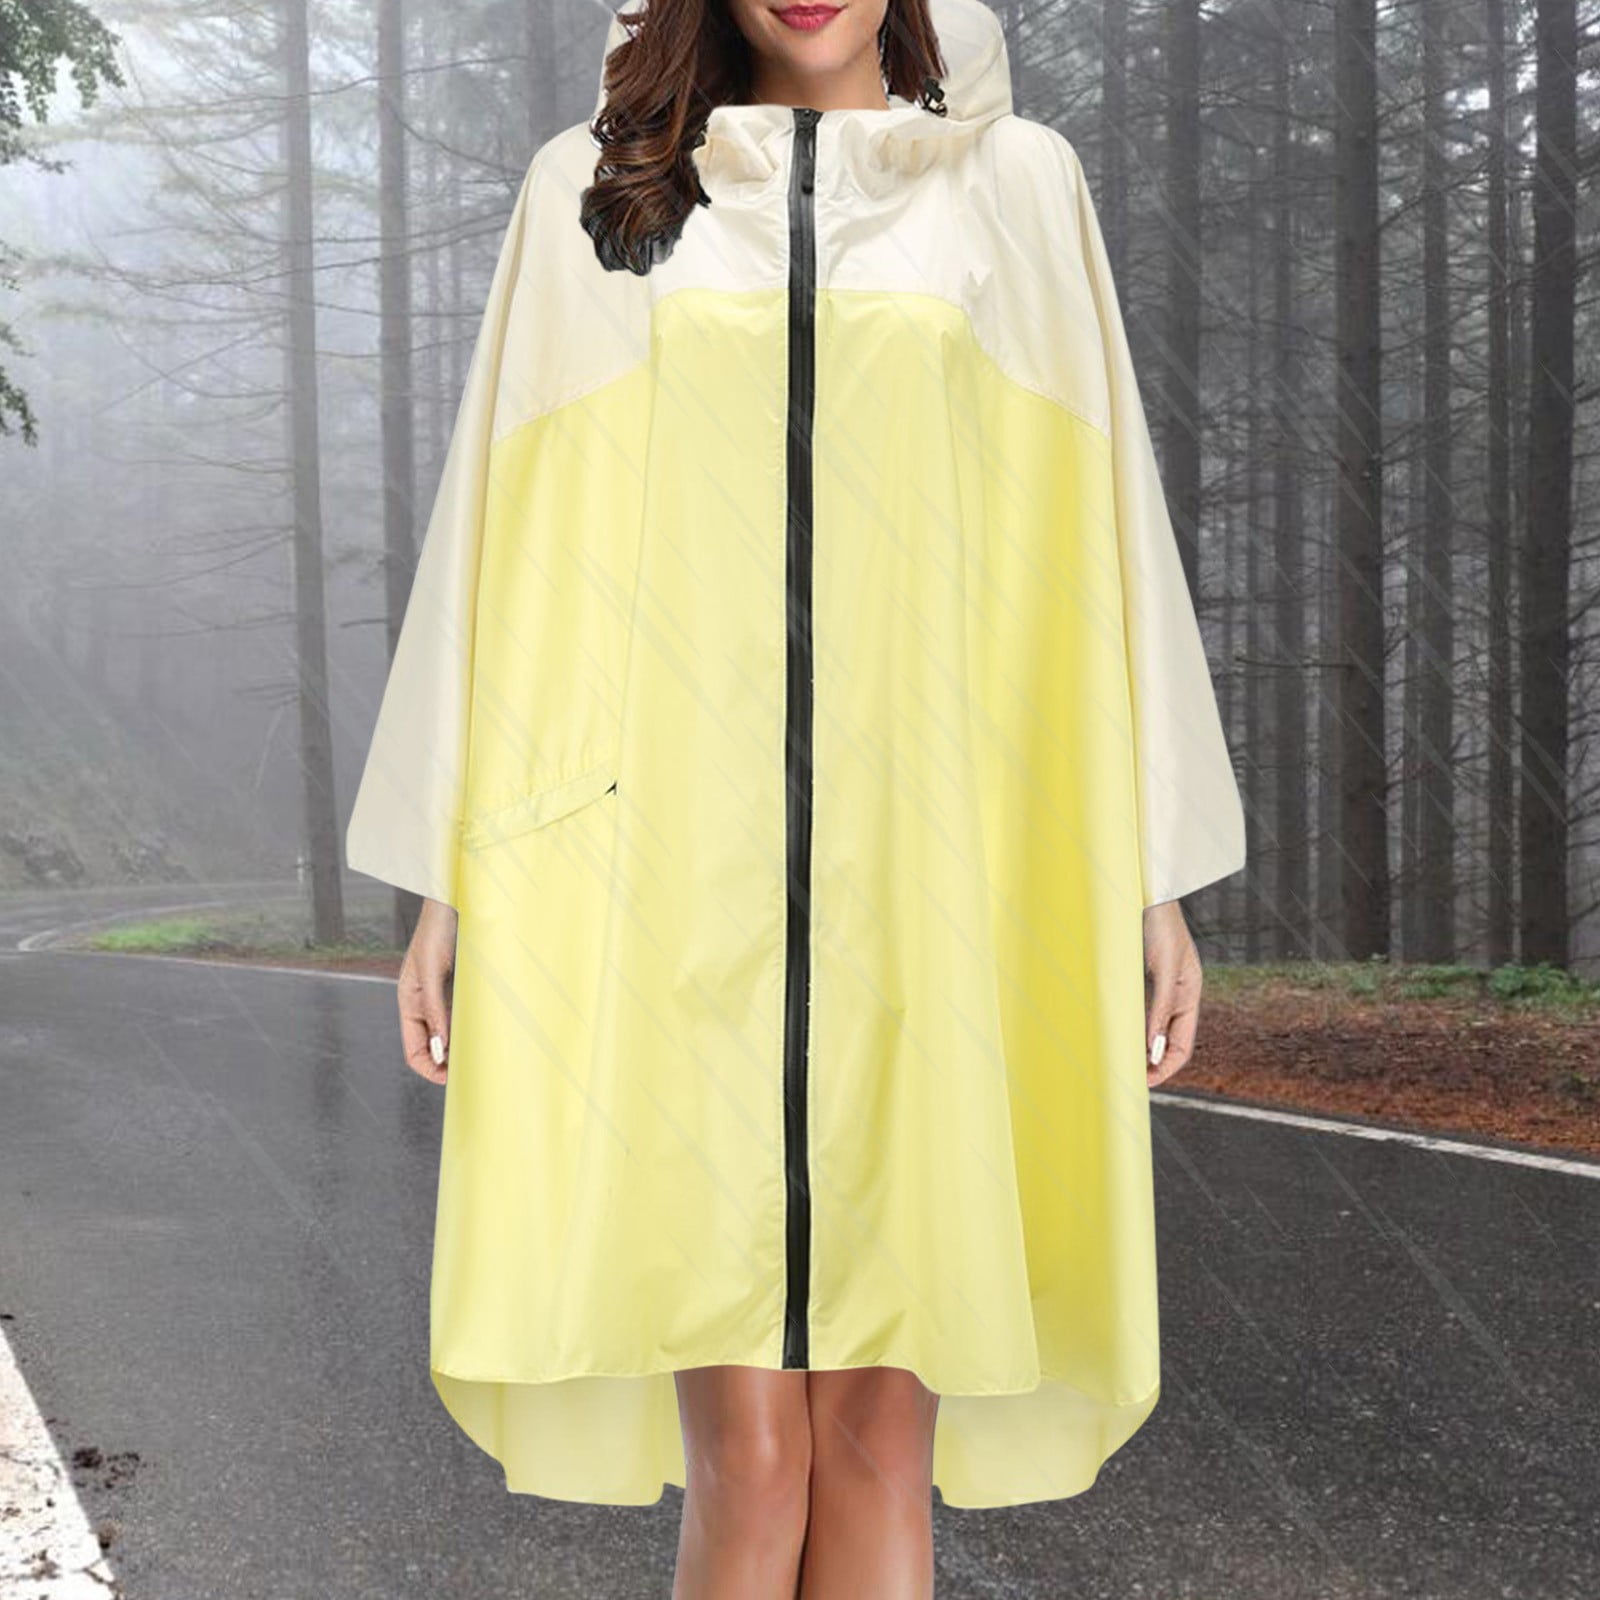 Unisex Raincoat Poncho Reusable Lightweight Rainwear in Polyester for Adult Wetry